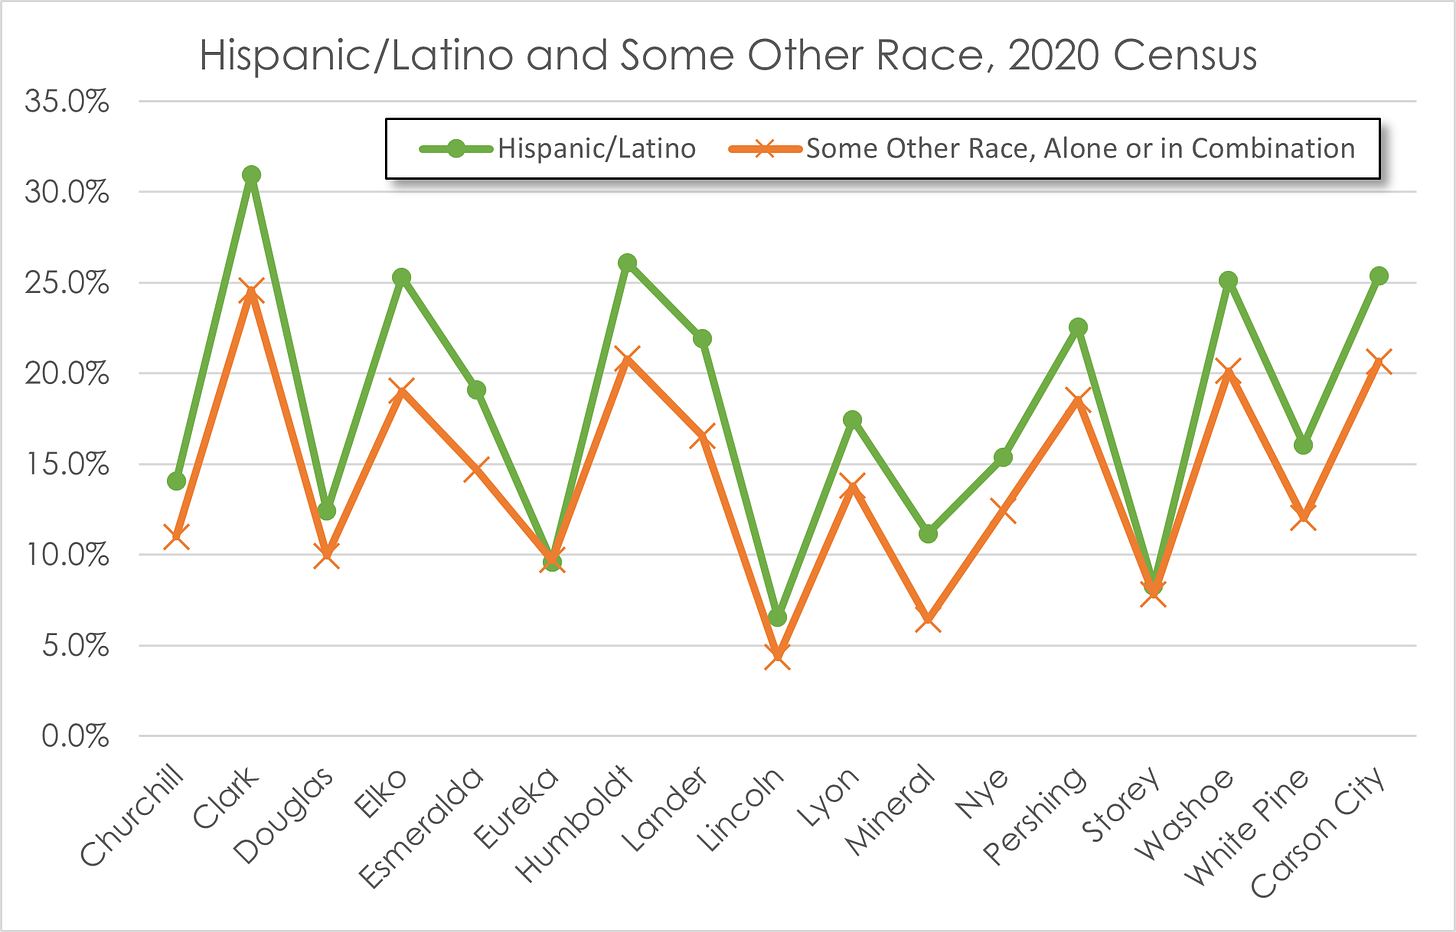 Chart showing population percentage identifying as Hispanic or Latino and those identifying as Some Other Race alone or in combination in Nevada by county, based on the 2020 Census. The two lines parallel each other closely across the state, indicating that the Hispanic/Latino and Some Other Race categories are closely related.